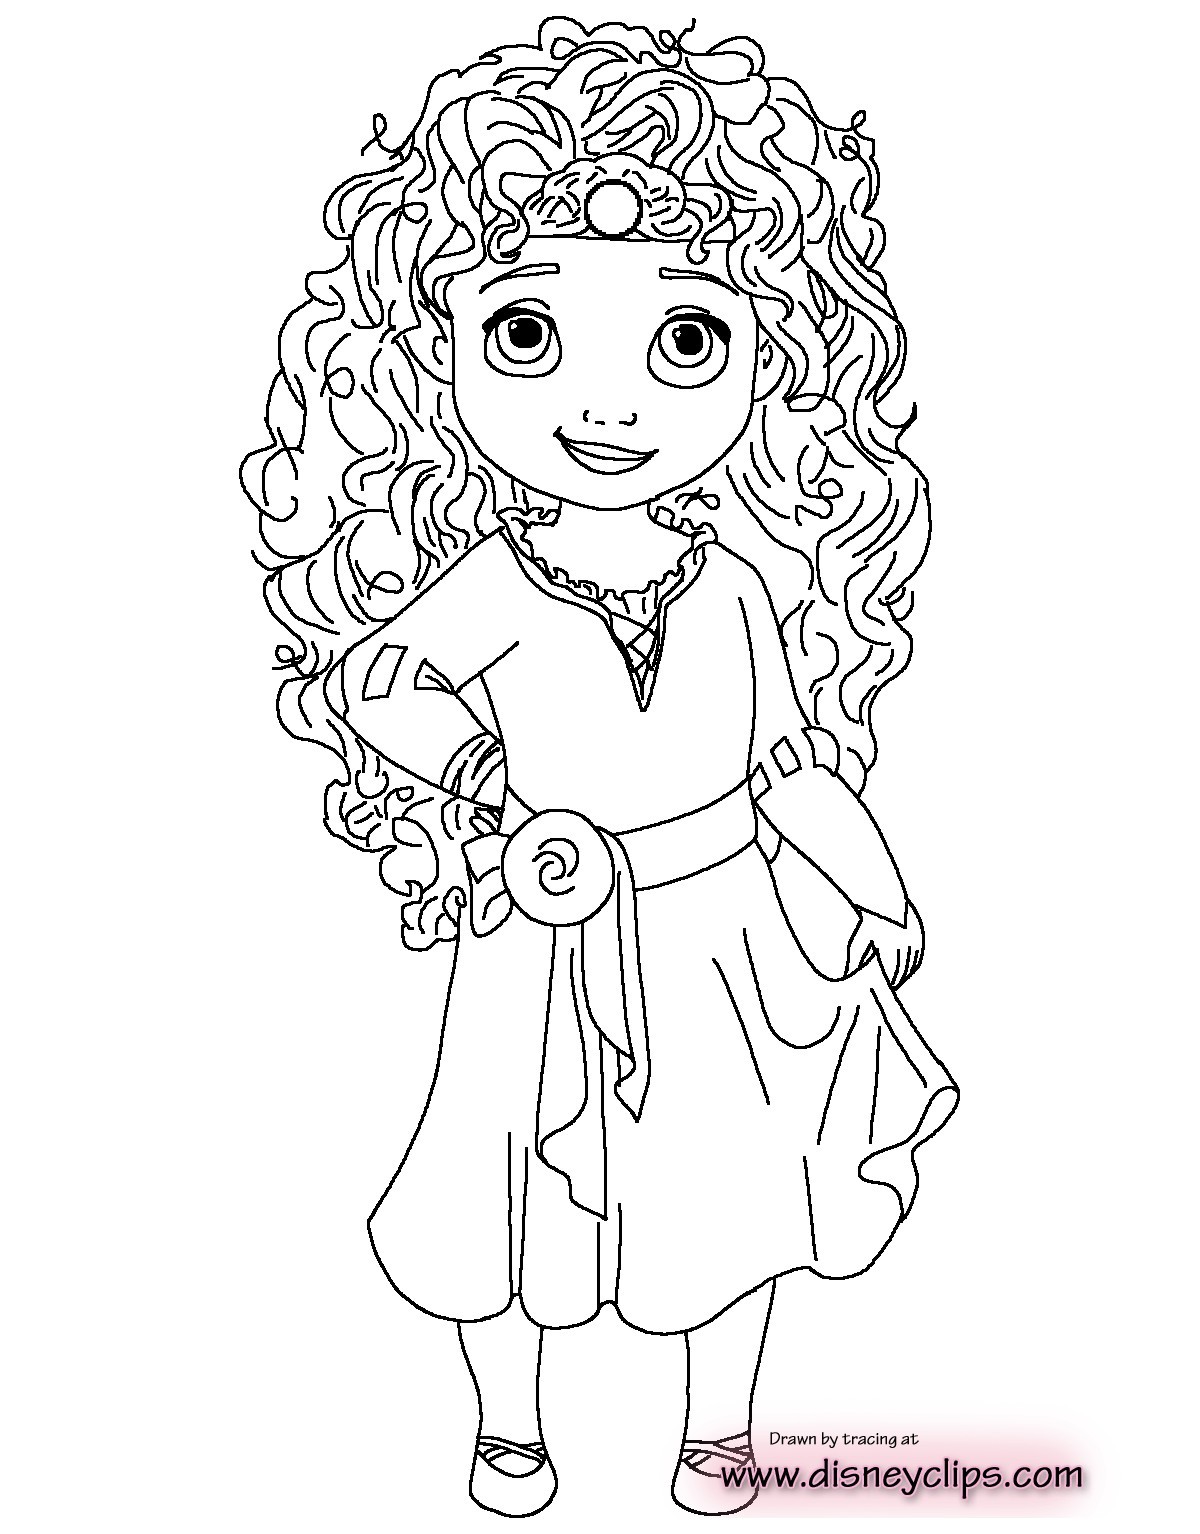 Disney Princess Coloring Pages For Girls At Getdrawings | Free Download